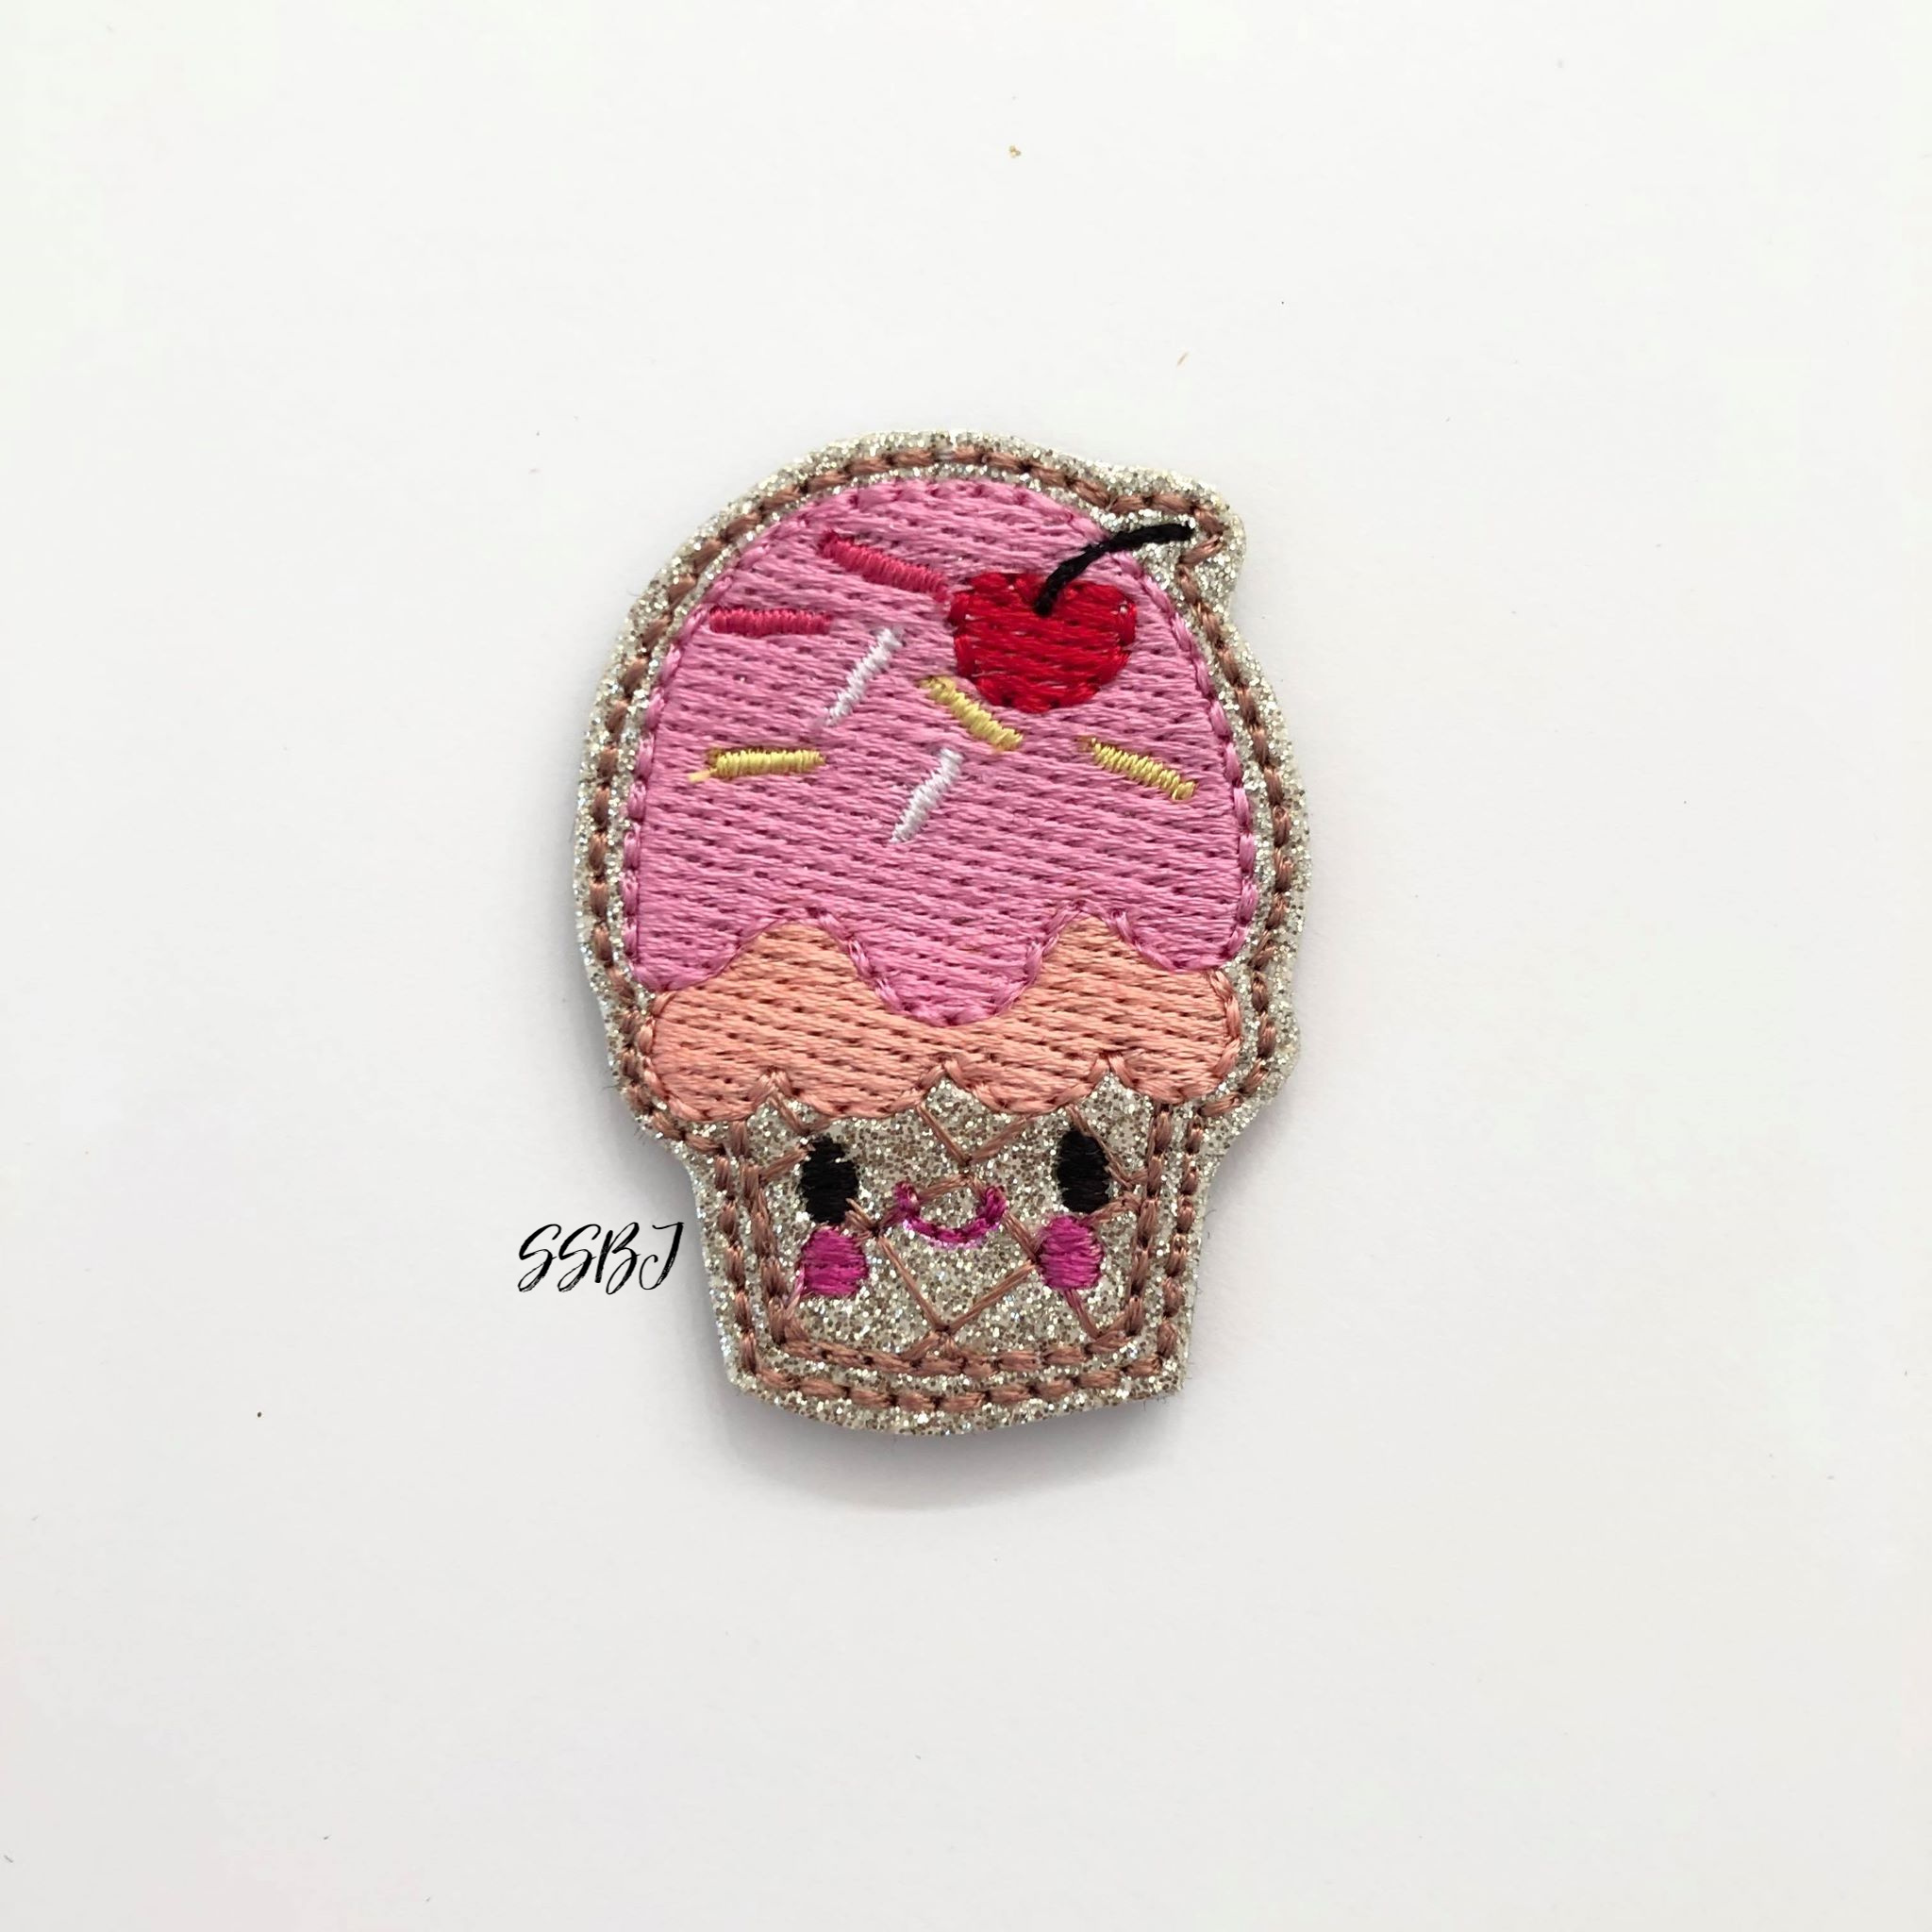 SSBJ Double Scoop Embroidery File